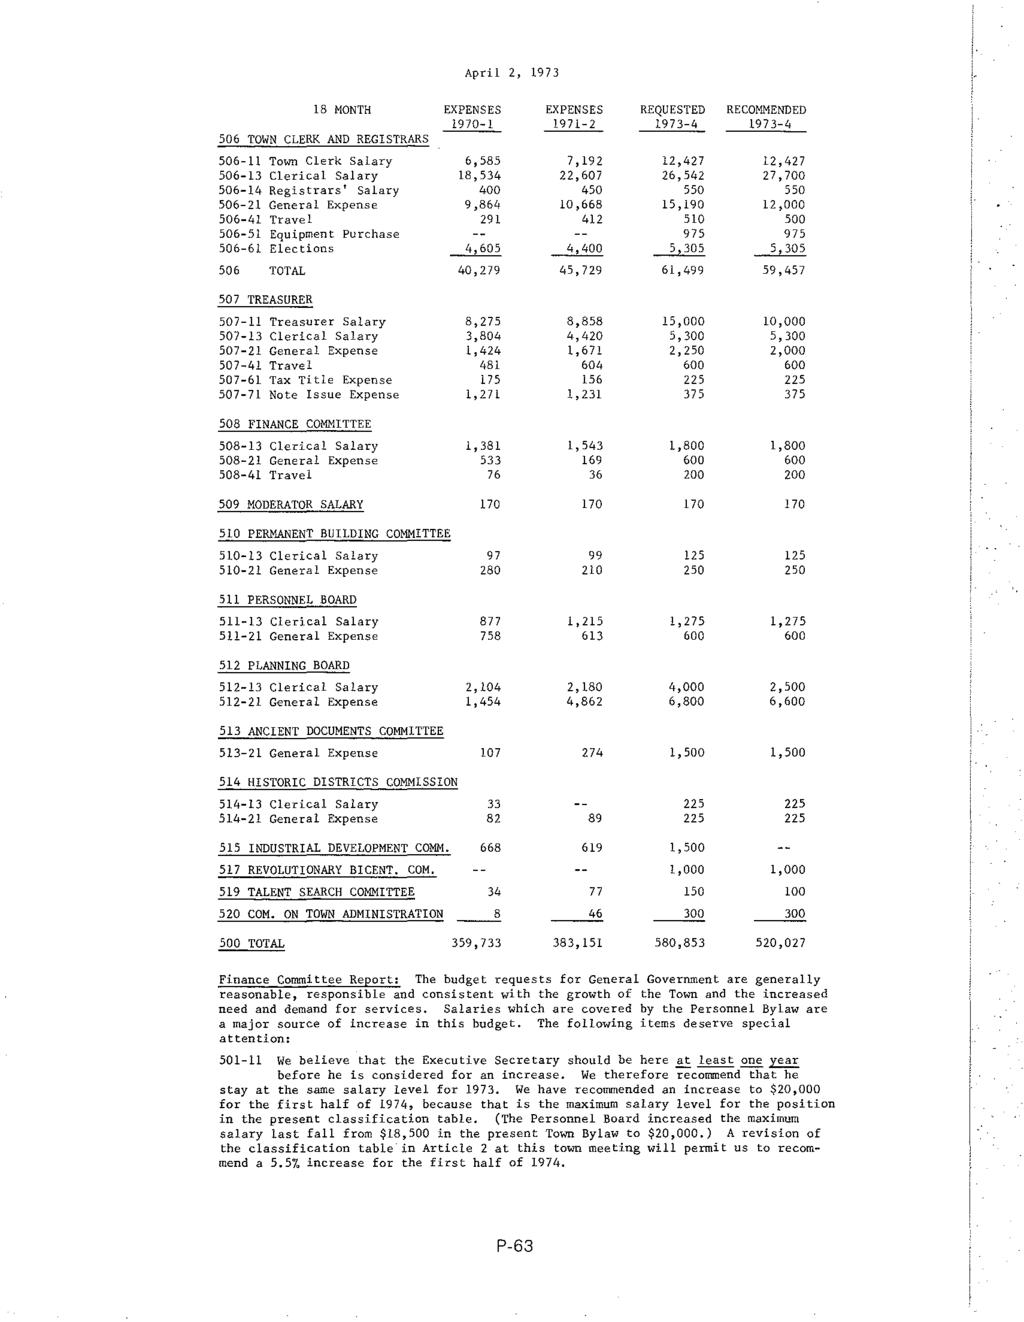 April 2, 1973 18 MONTH EXPENSES 1970-1 506 TOWN CLERK AND REGISTRARS 506-11 Town Clerk Salary 506-13 Clerical Salary 506-14 Registrars' Salary 506-21 General Expense 506-41 Travel 506-51 Equipment